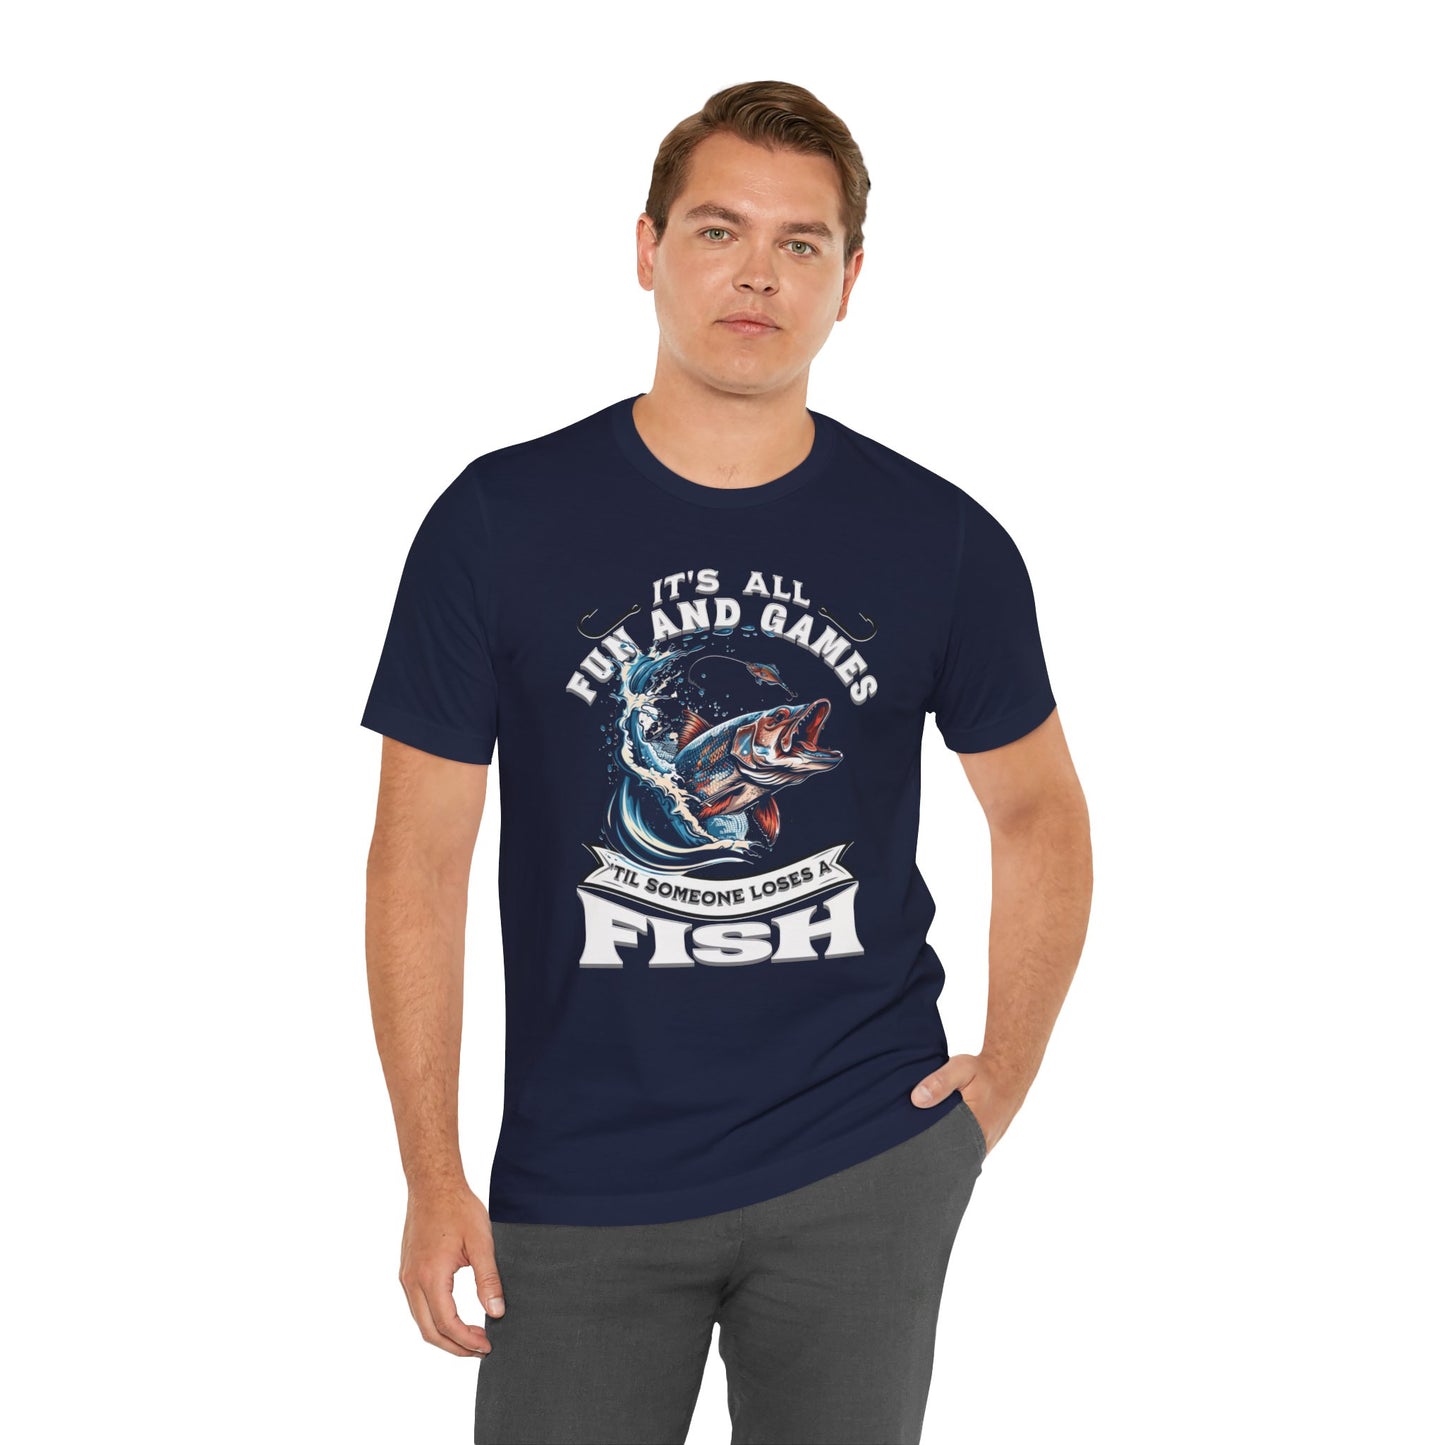 Navy blue unisex It's All Fun and Games Until Someone Loses a Fish - T-shirt featuring a graphic of a leaping fish with its mouth open, encircled by the phrase "it's all fun and games 'til someone loses a fish.